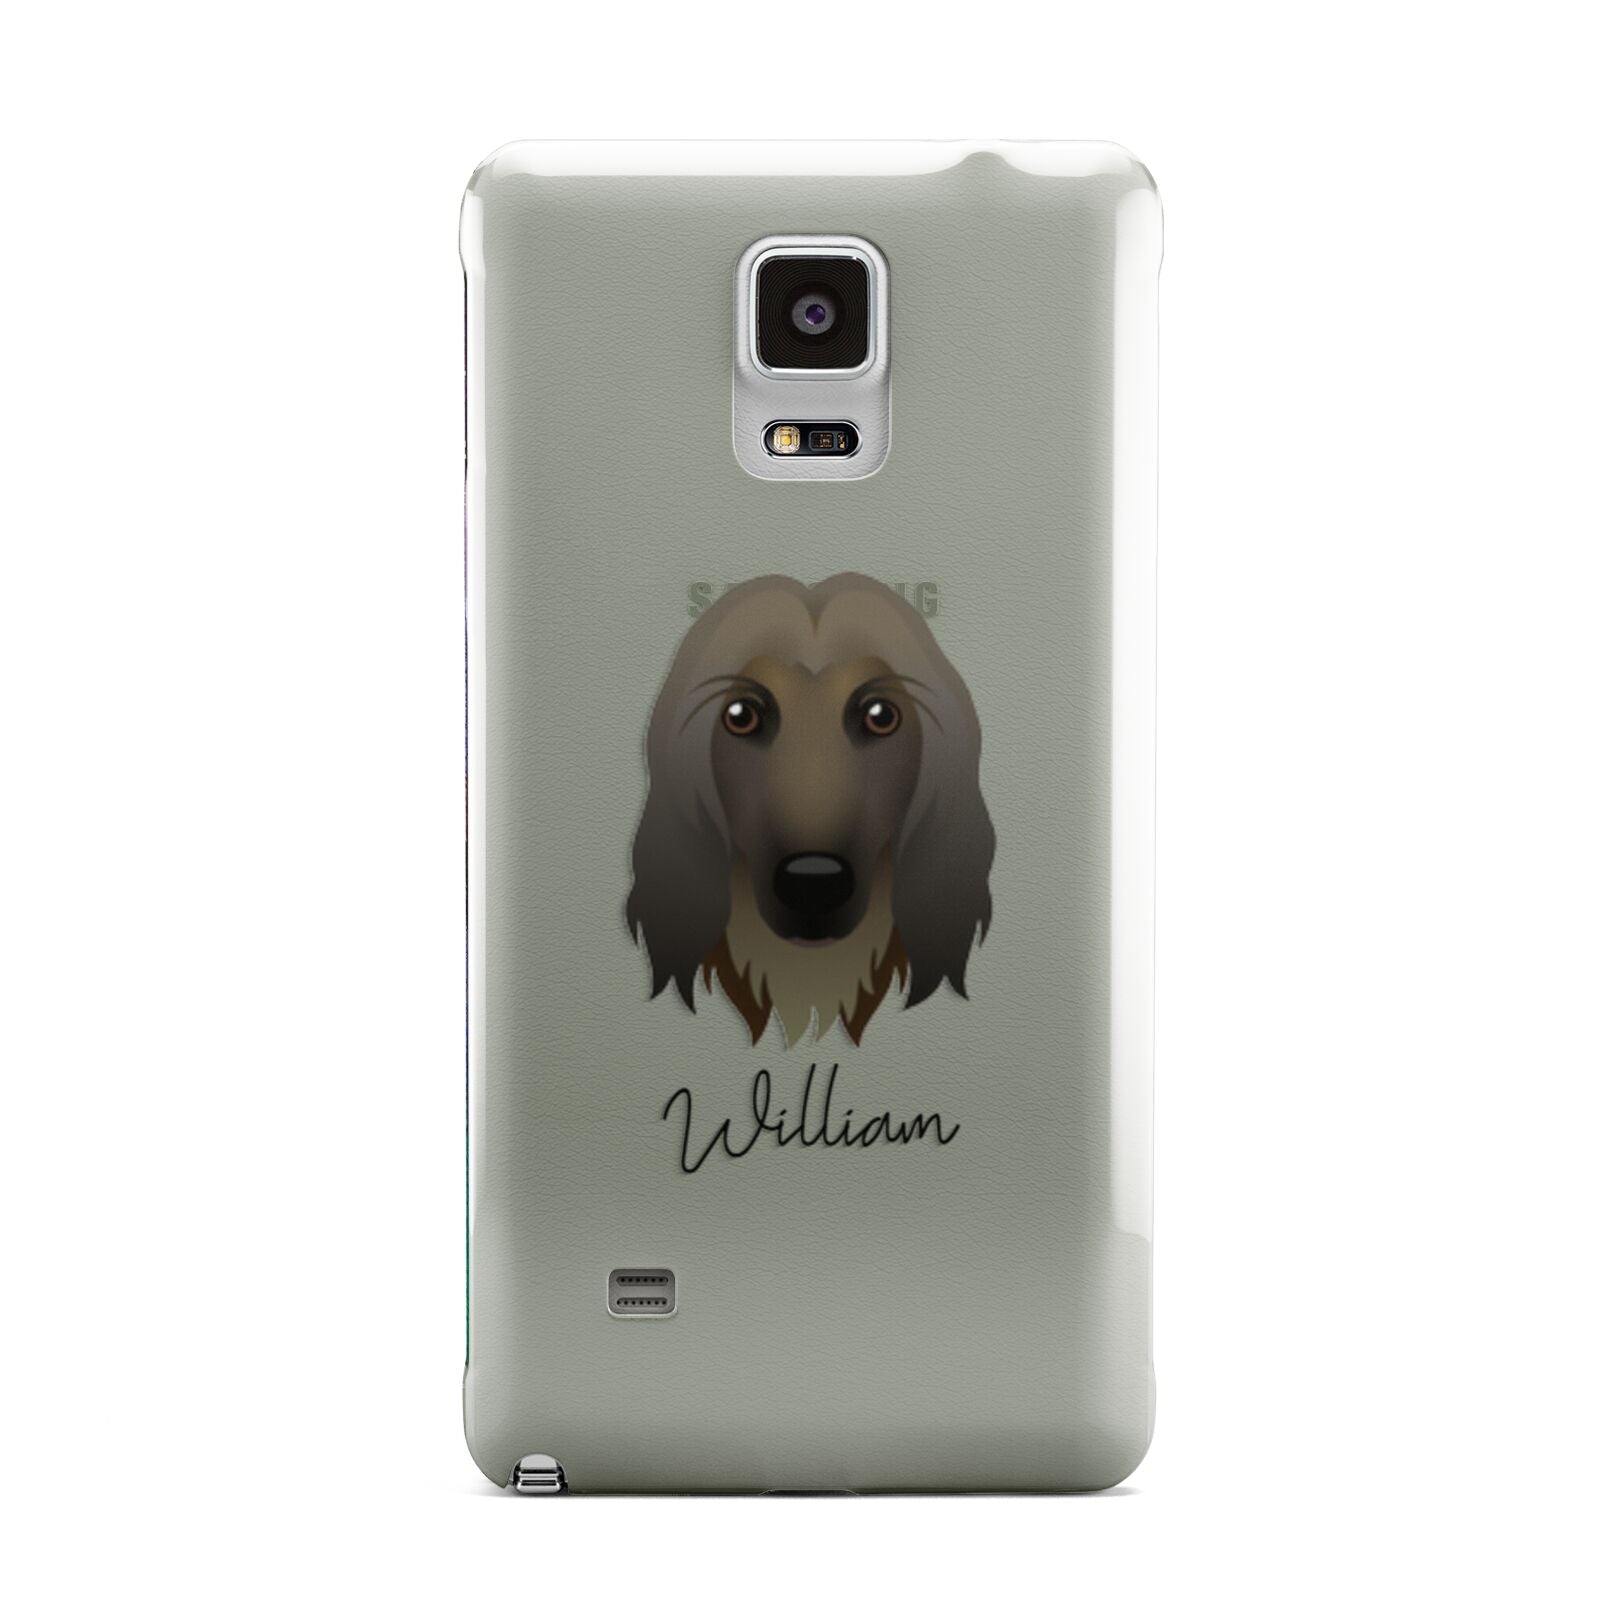 Afghan Hound Personalised Samsung Galaxy Note 4 Case